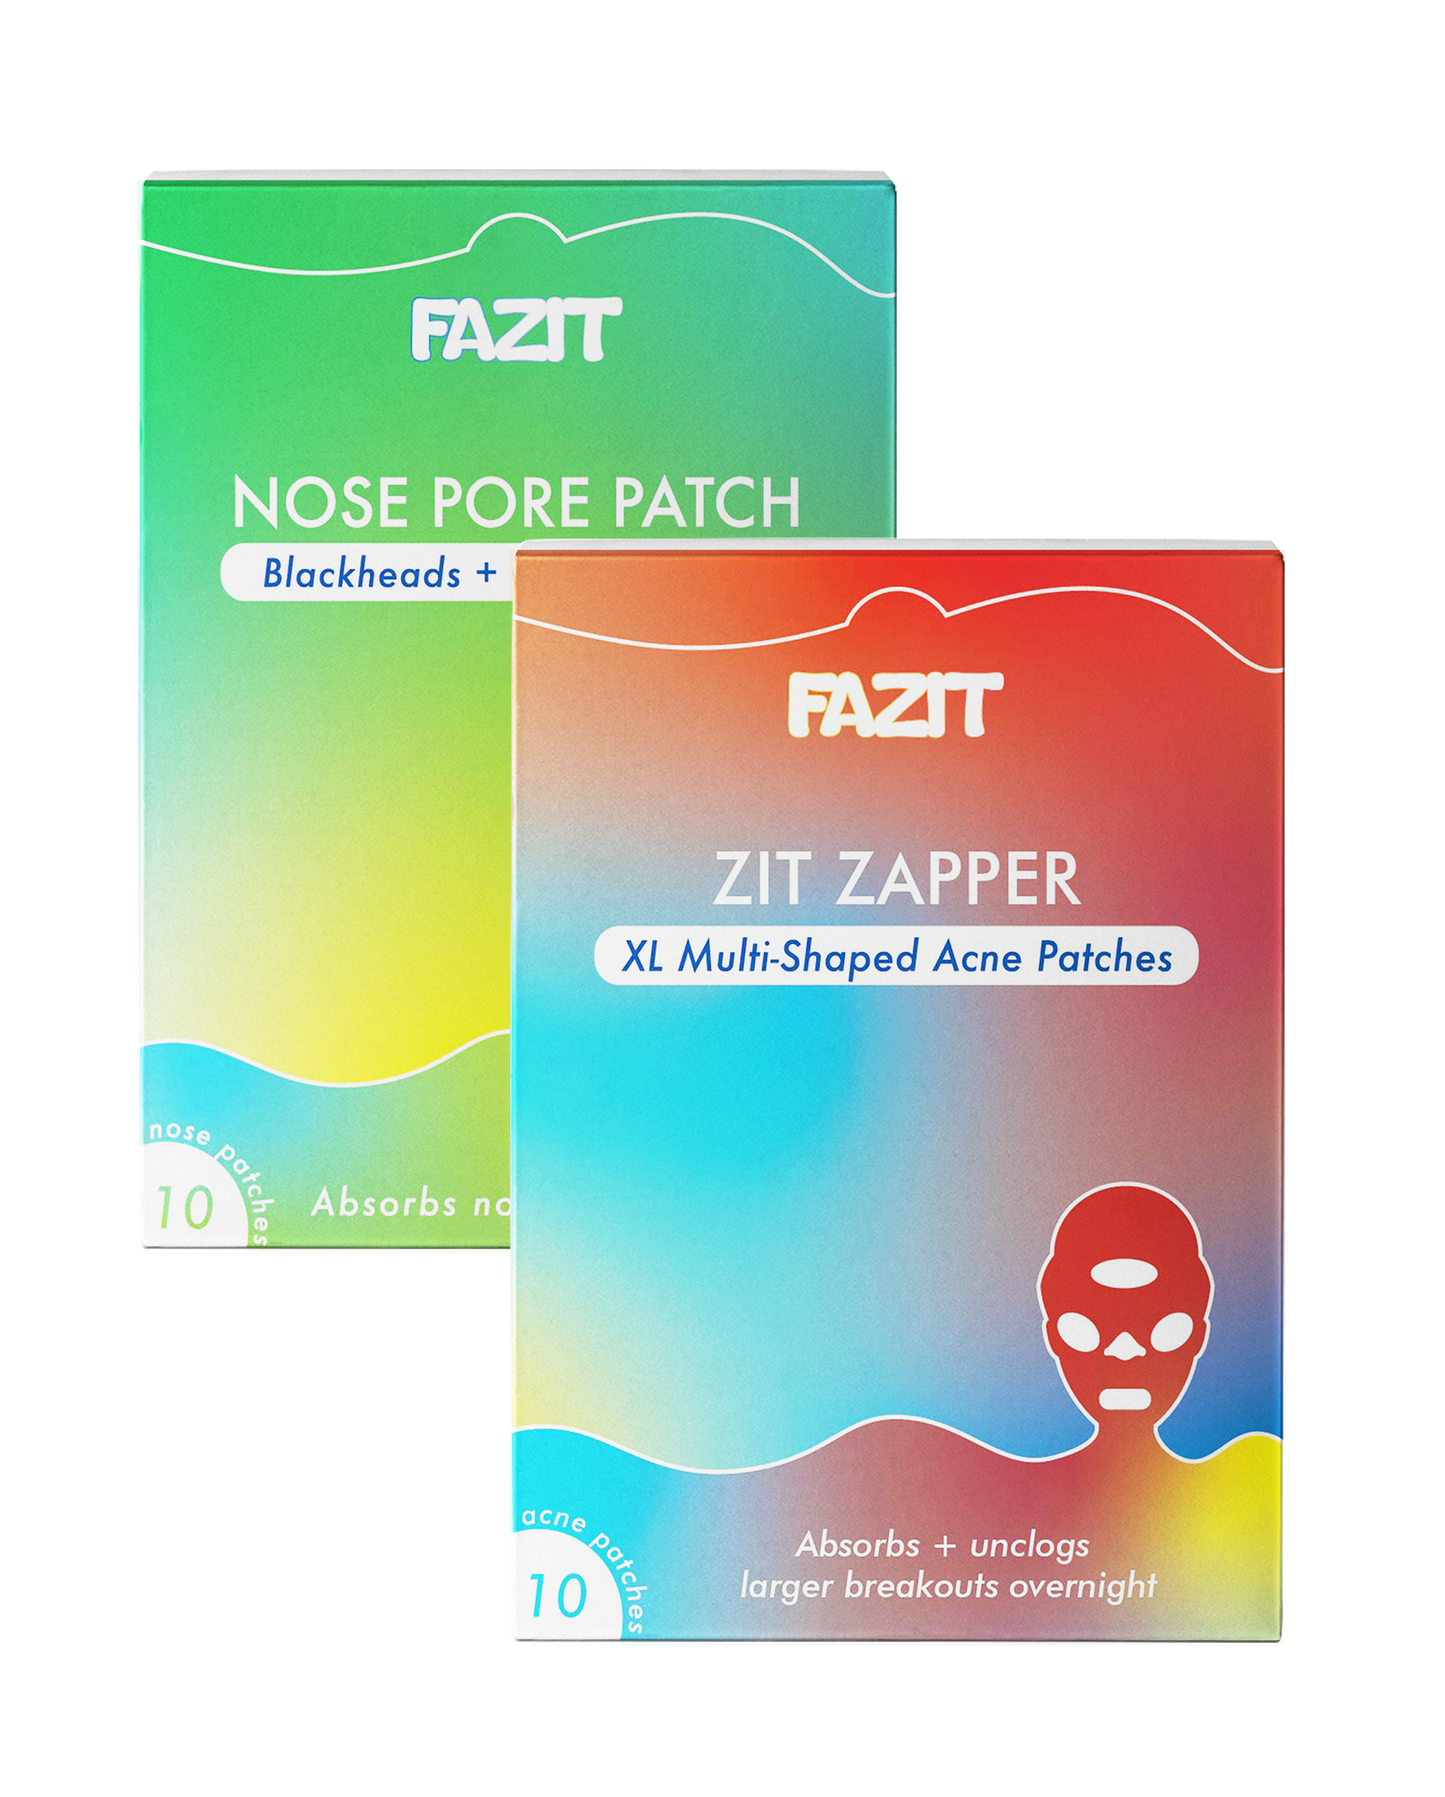 pore patch and zit zapper